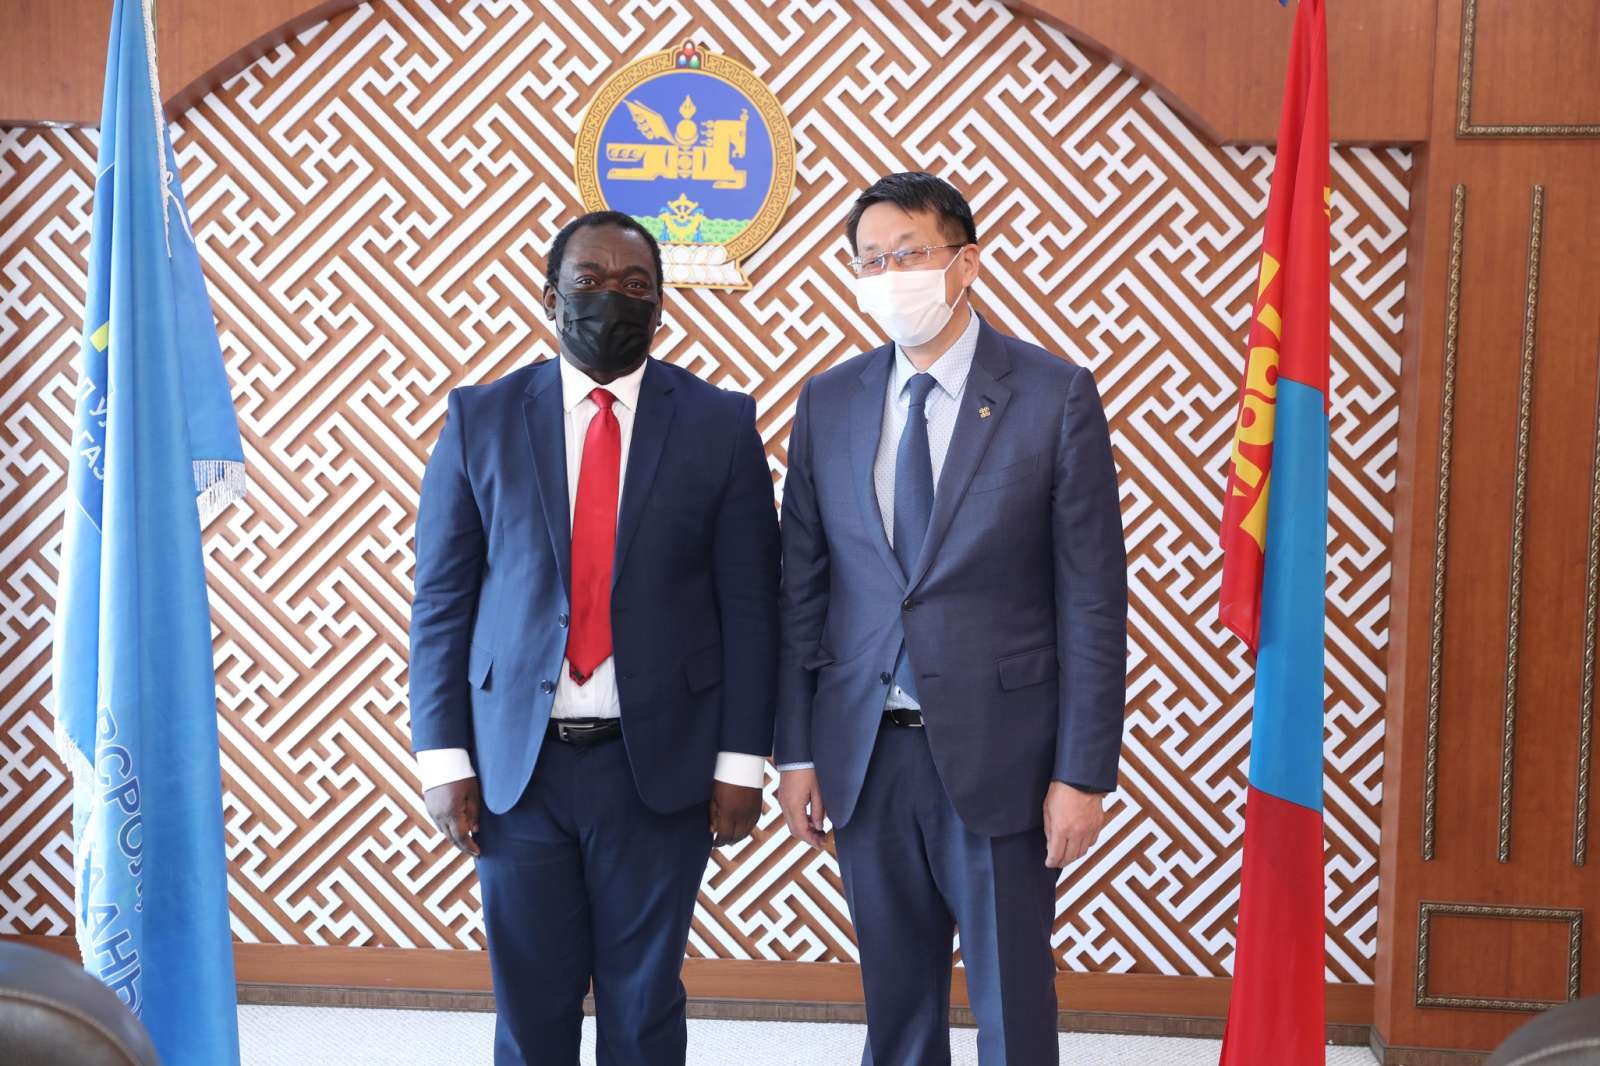 THE MINISTER OF EDUCATION AND SCIENCE OF MONGOLIA WELCOMES UNICEF REPRESENTATIVE IN MONGOLIA MR EVARISTE KOUASSI KOMLAN 